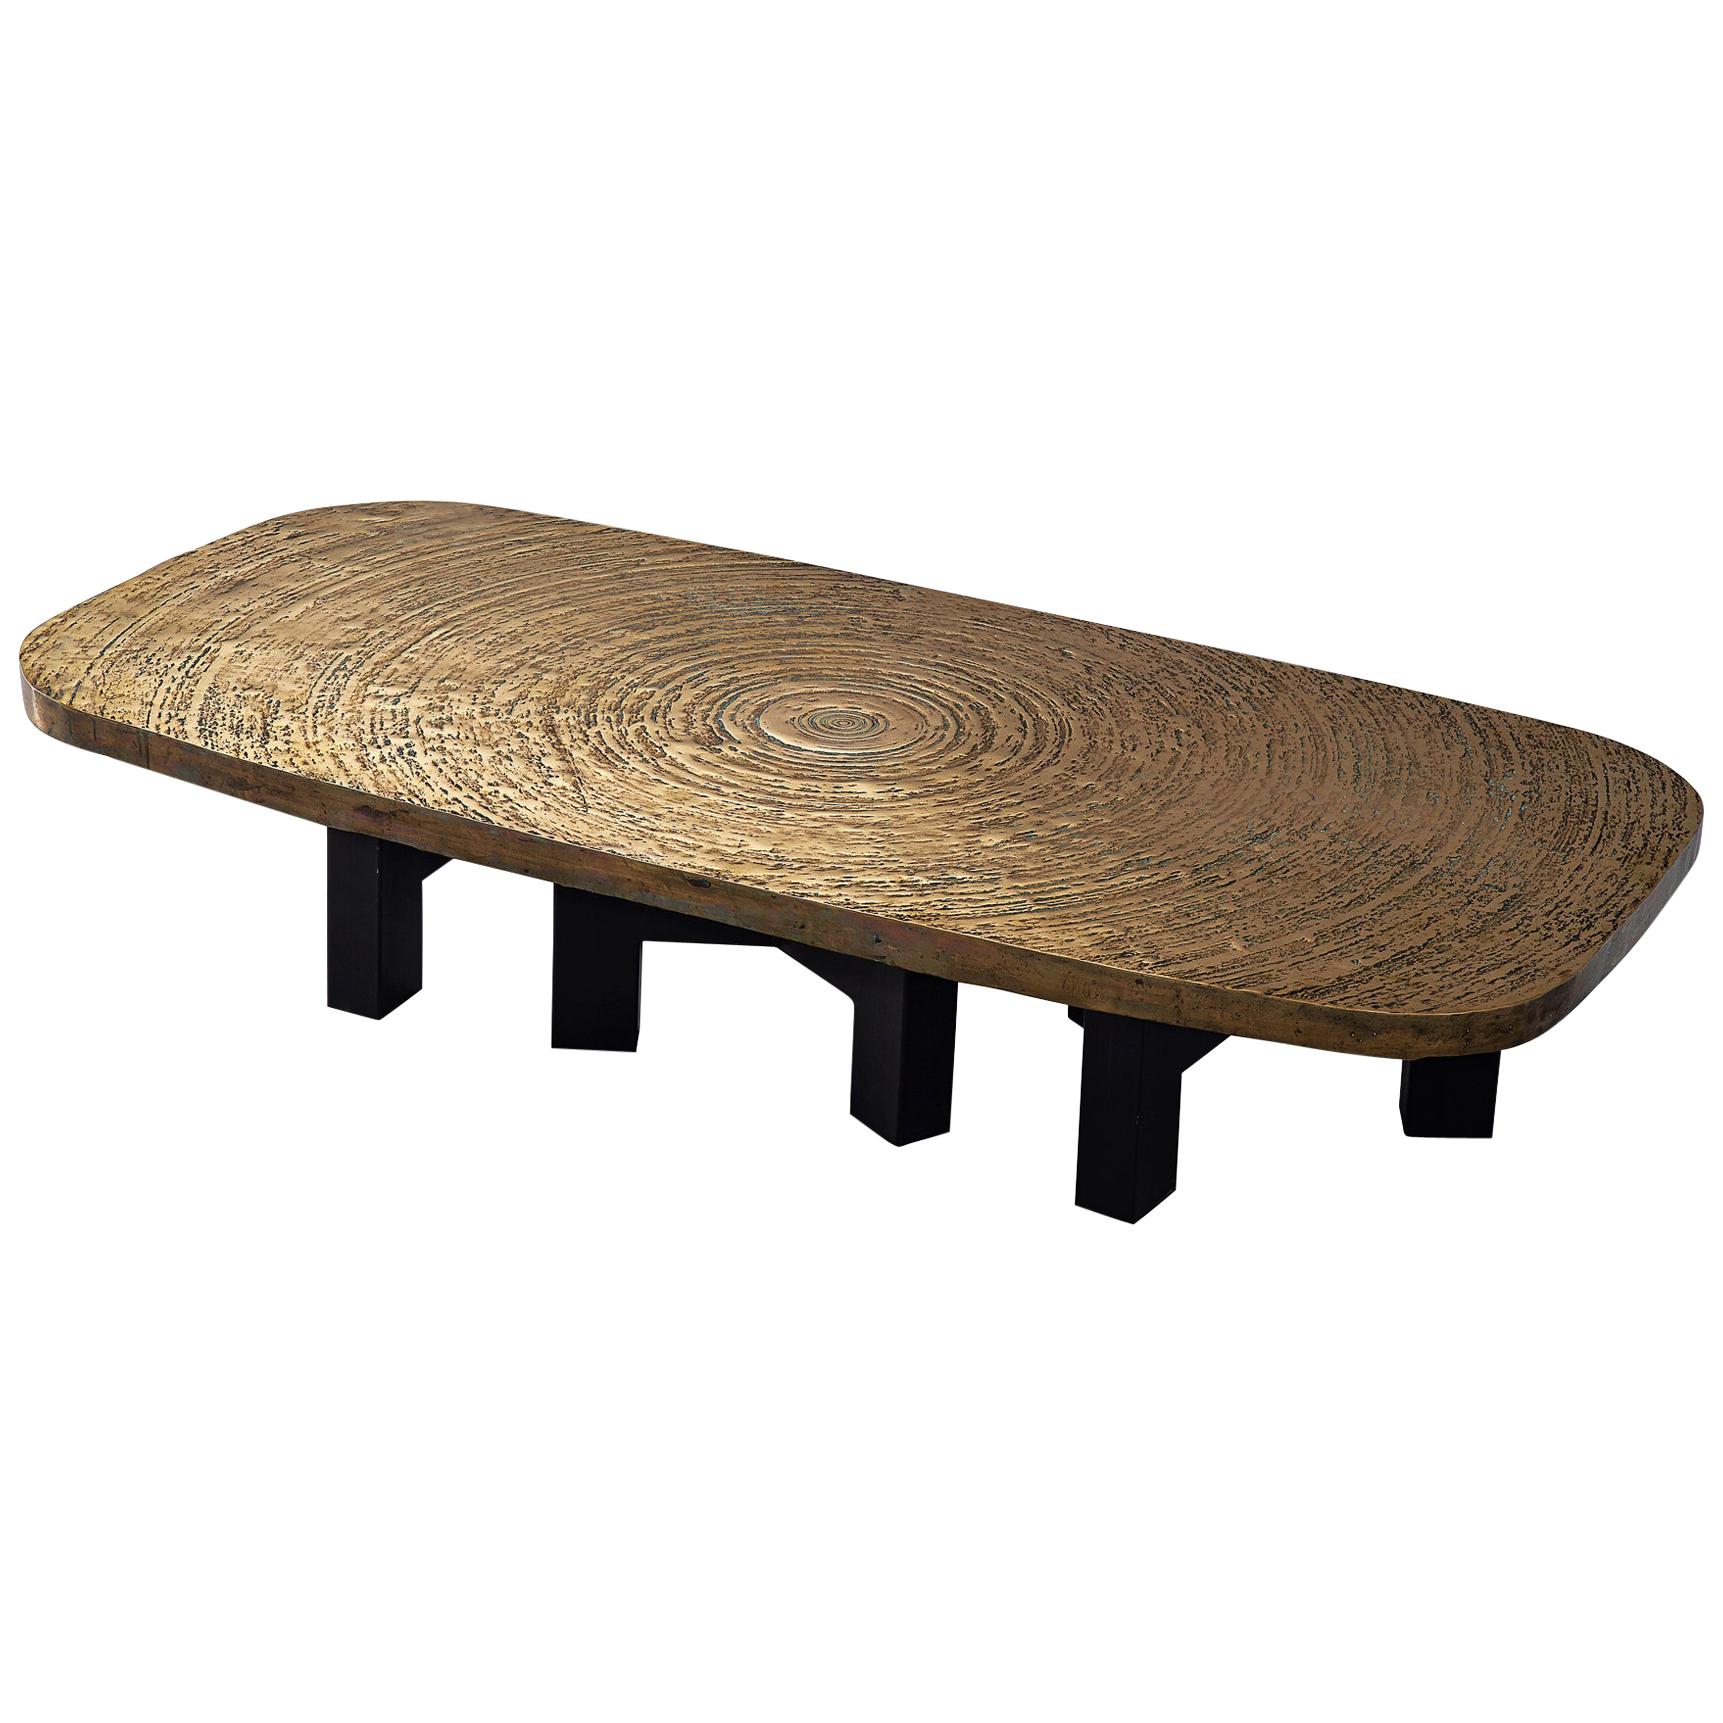 Early Ado Chale 'Goutte d'Eau' Coffee Table in Patinated Bronze